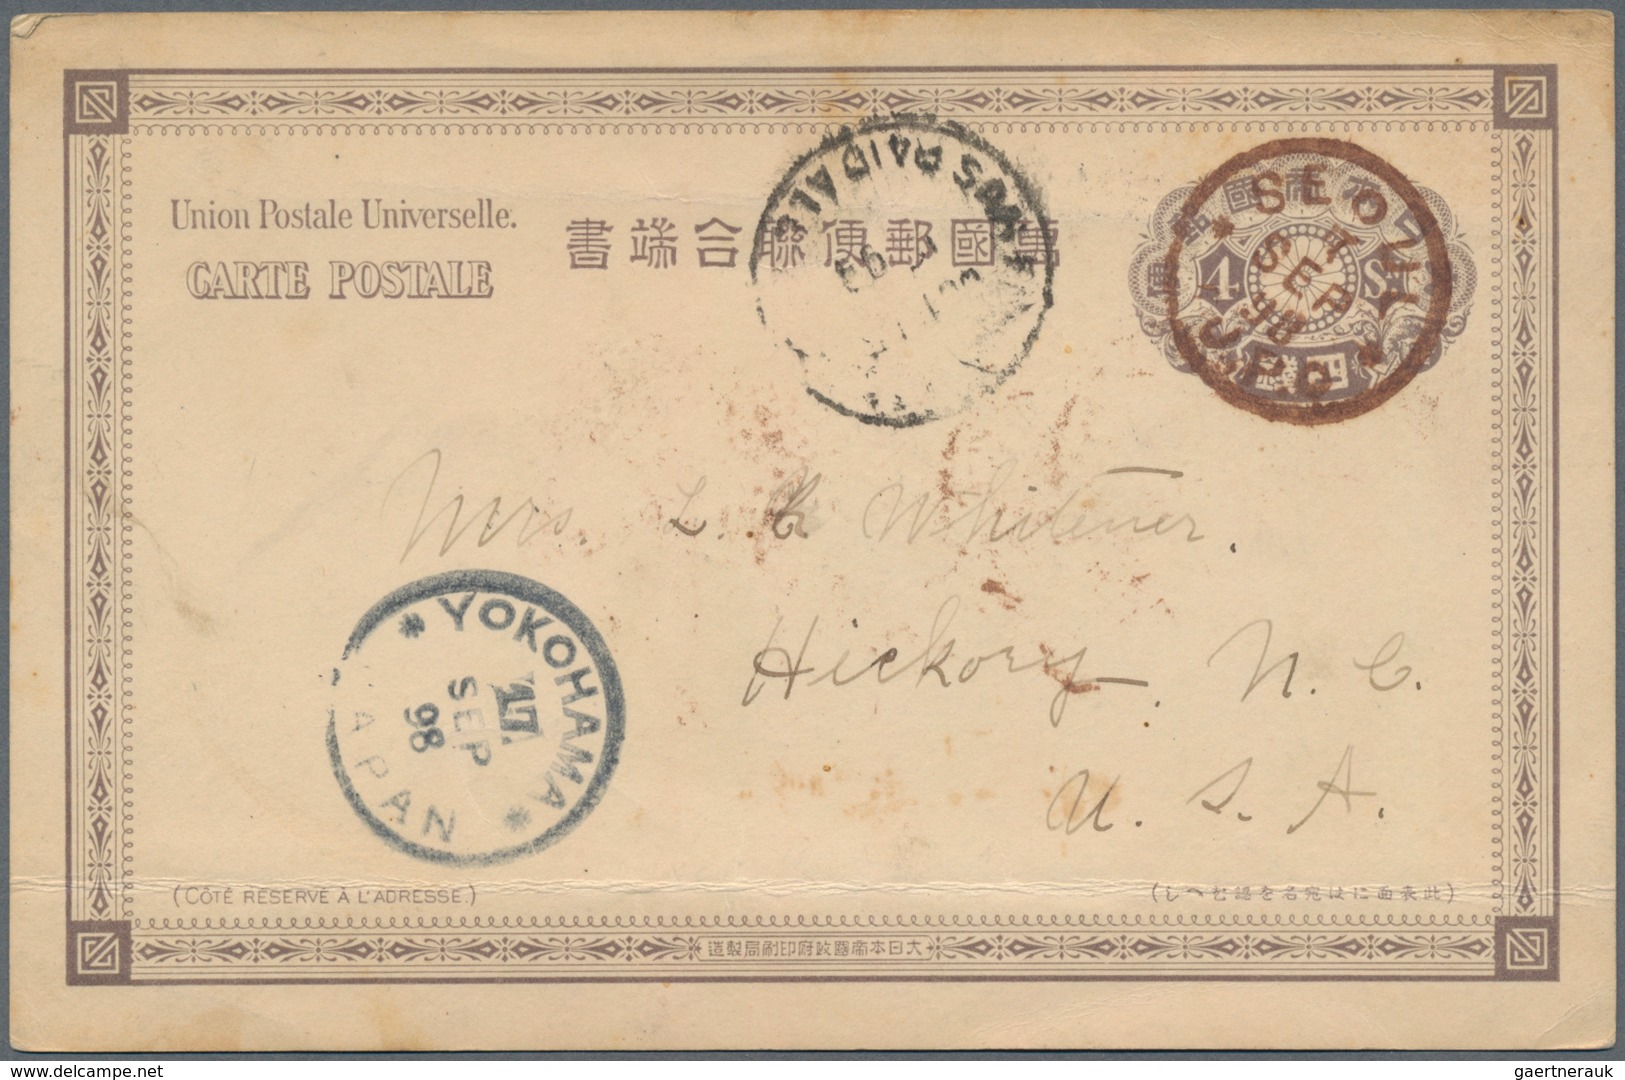 Japanische Post In Korea: 1898, UPU Card 4 S. Violet Brown Canc. Brown "SEOUL 7 SEP 98 I.J.P.O." Via - Military Service Stamps